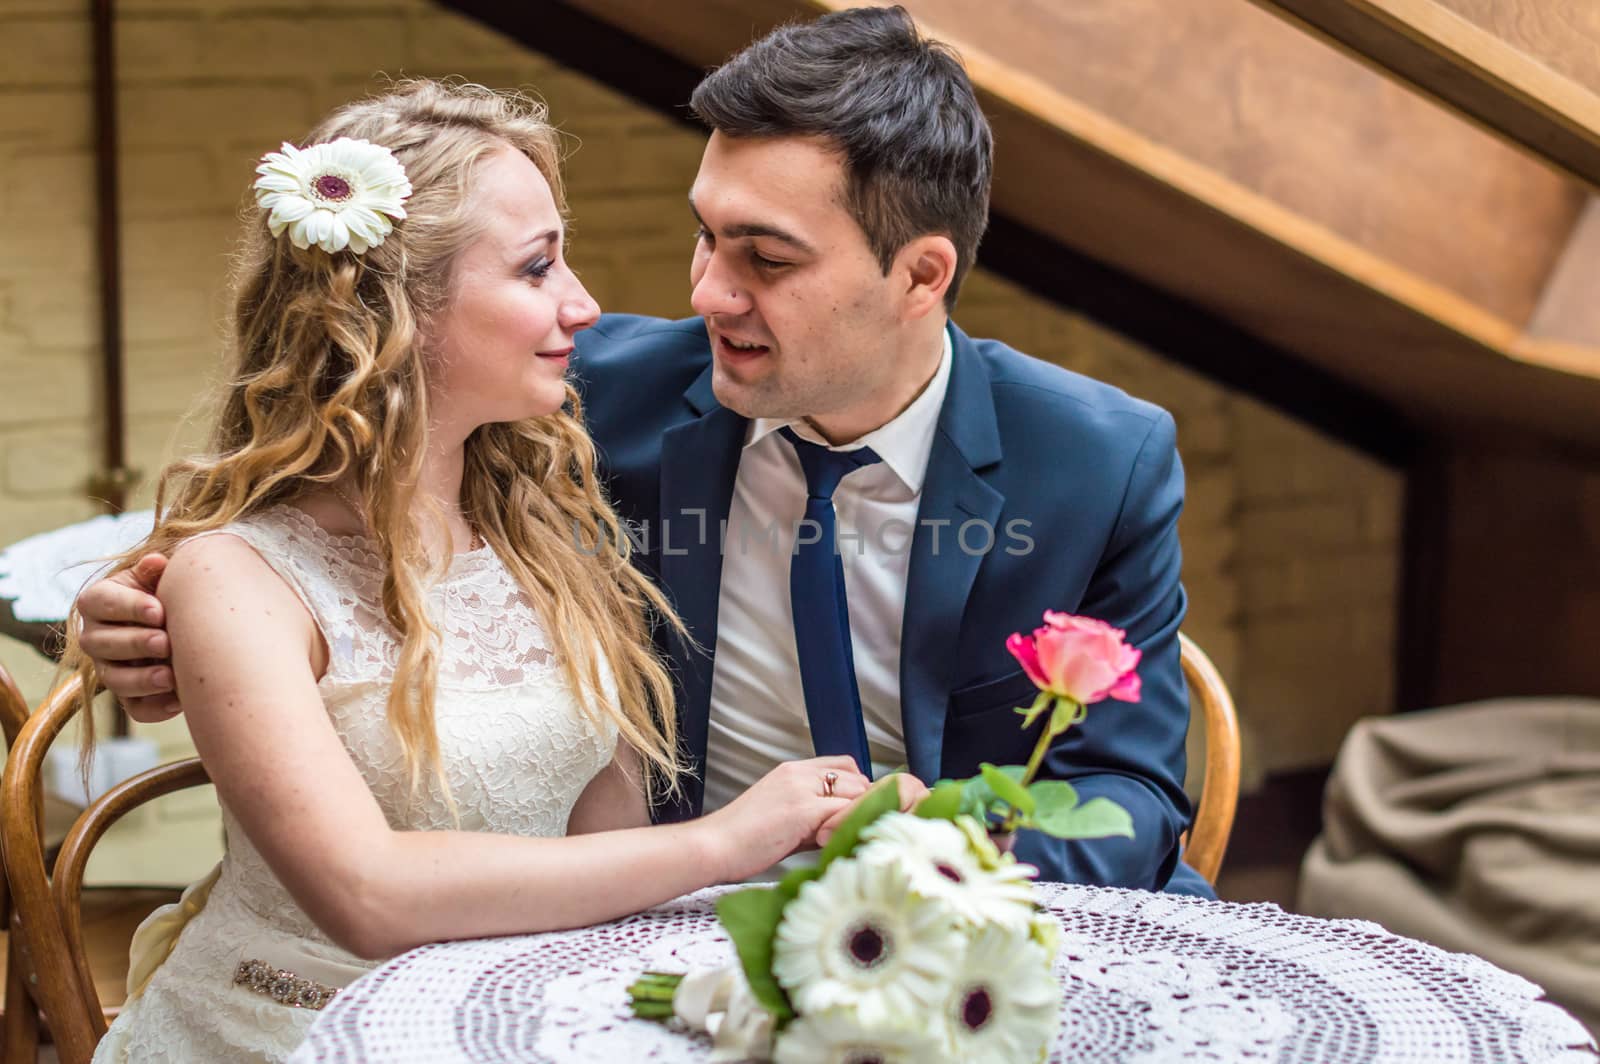 newlyweds sitting in the Cafe at the table